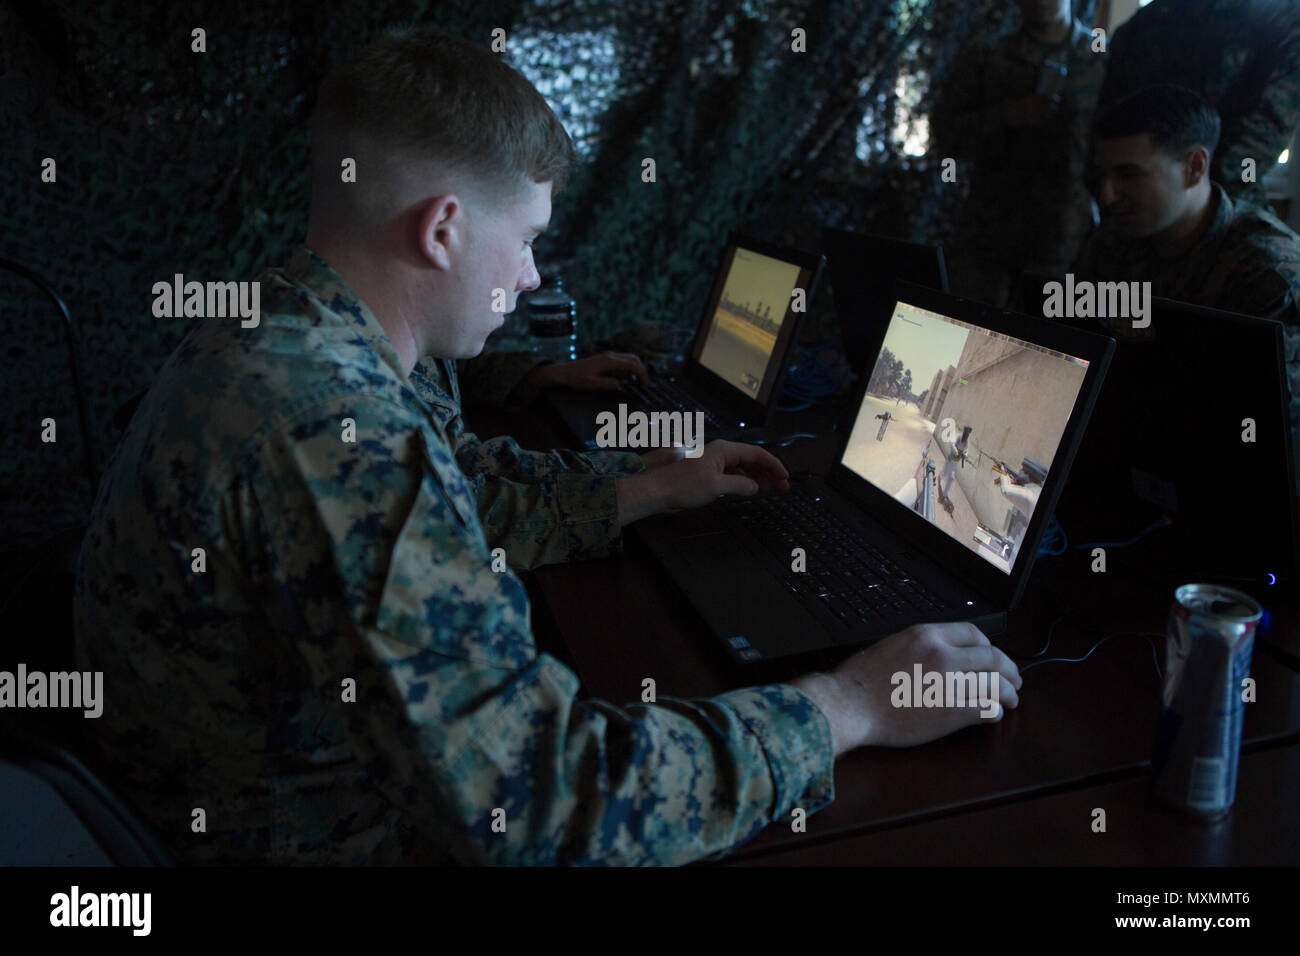 U.S. Marine Corps Sgt. Robert Z. Weaver, infantry Marine, 2nd Battalion, 6th Marine Regiment, 2nd Marine Division (2d MARDIV), utilizes Virtual Battlespace 3 during Spartan Emerging Technology and Innovation Week on Camp Lejeune, N.C., Nov. 17, 2016. The Spartan Emerging Technology and Innovation Week showcases new equipment used to enhance the training of future Marines. (U.S. Marine Corps photo by Lance Cpl. Alexis C. Schneider, 2d MARDIV Combat Camera) Stock Photo